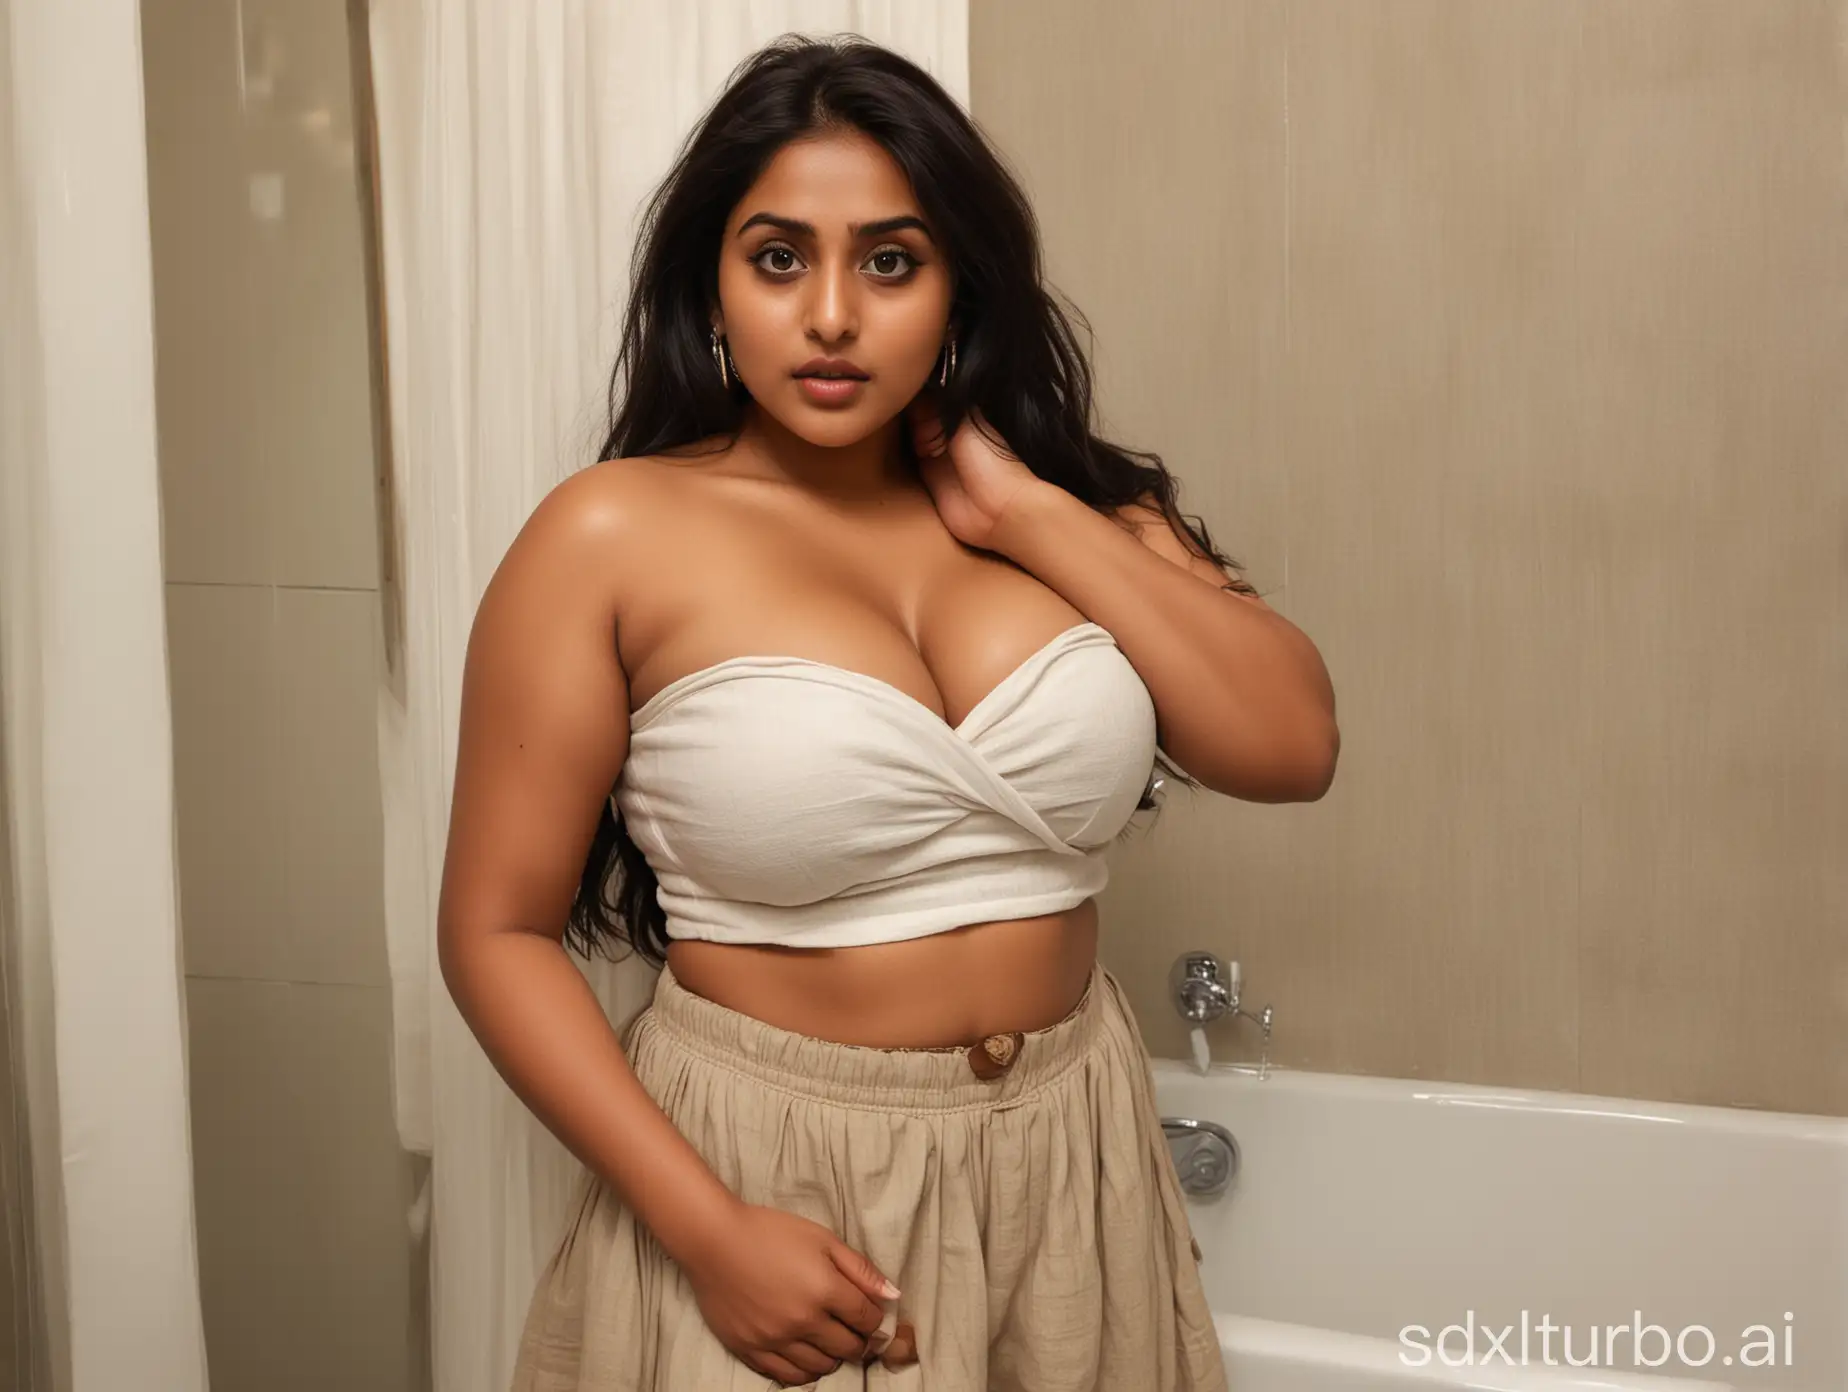 A curvy Indian woman with large breasts, big eyes, perfect wine-red eyes, fantastic face, beautiful appearance, and a plump feminine body. She has a buxom body, wearing a strapless linen crop top that reveals a deep V-shaped cleavage and a low-waisted mini skirt. She is hugging her male family members in the bathroom